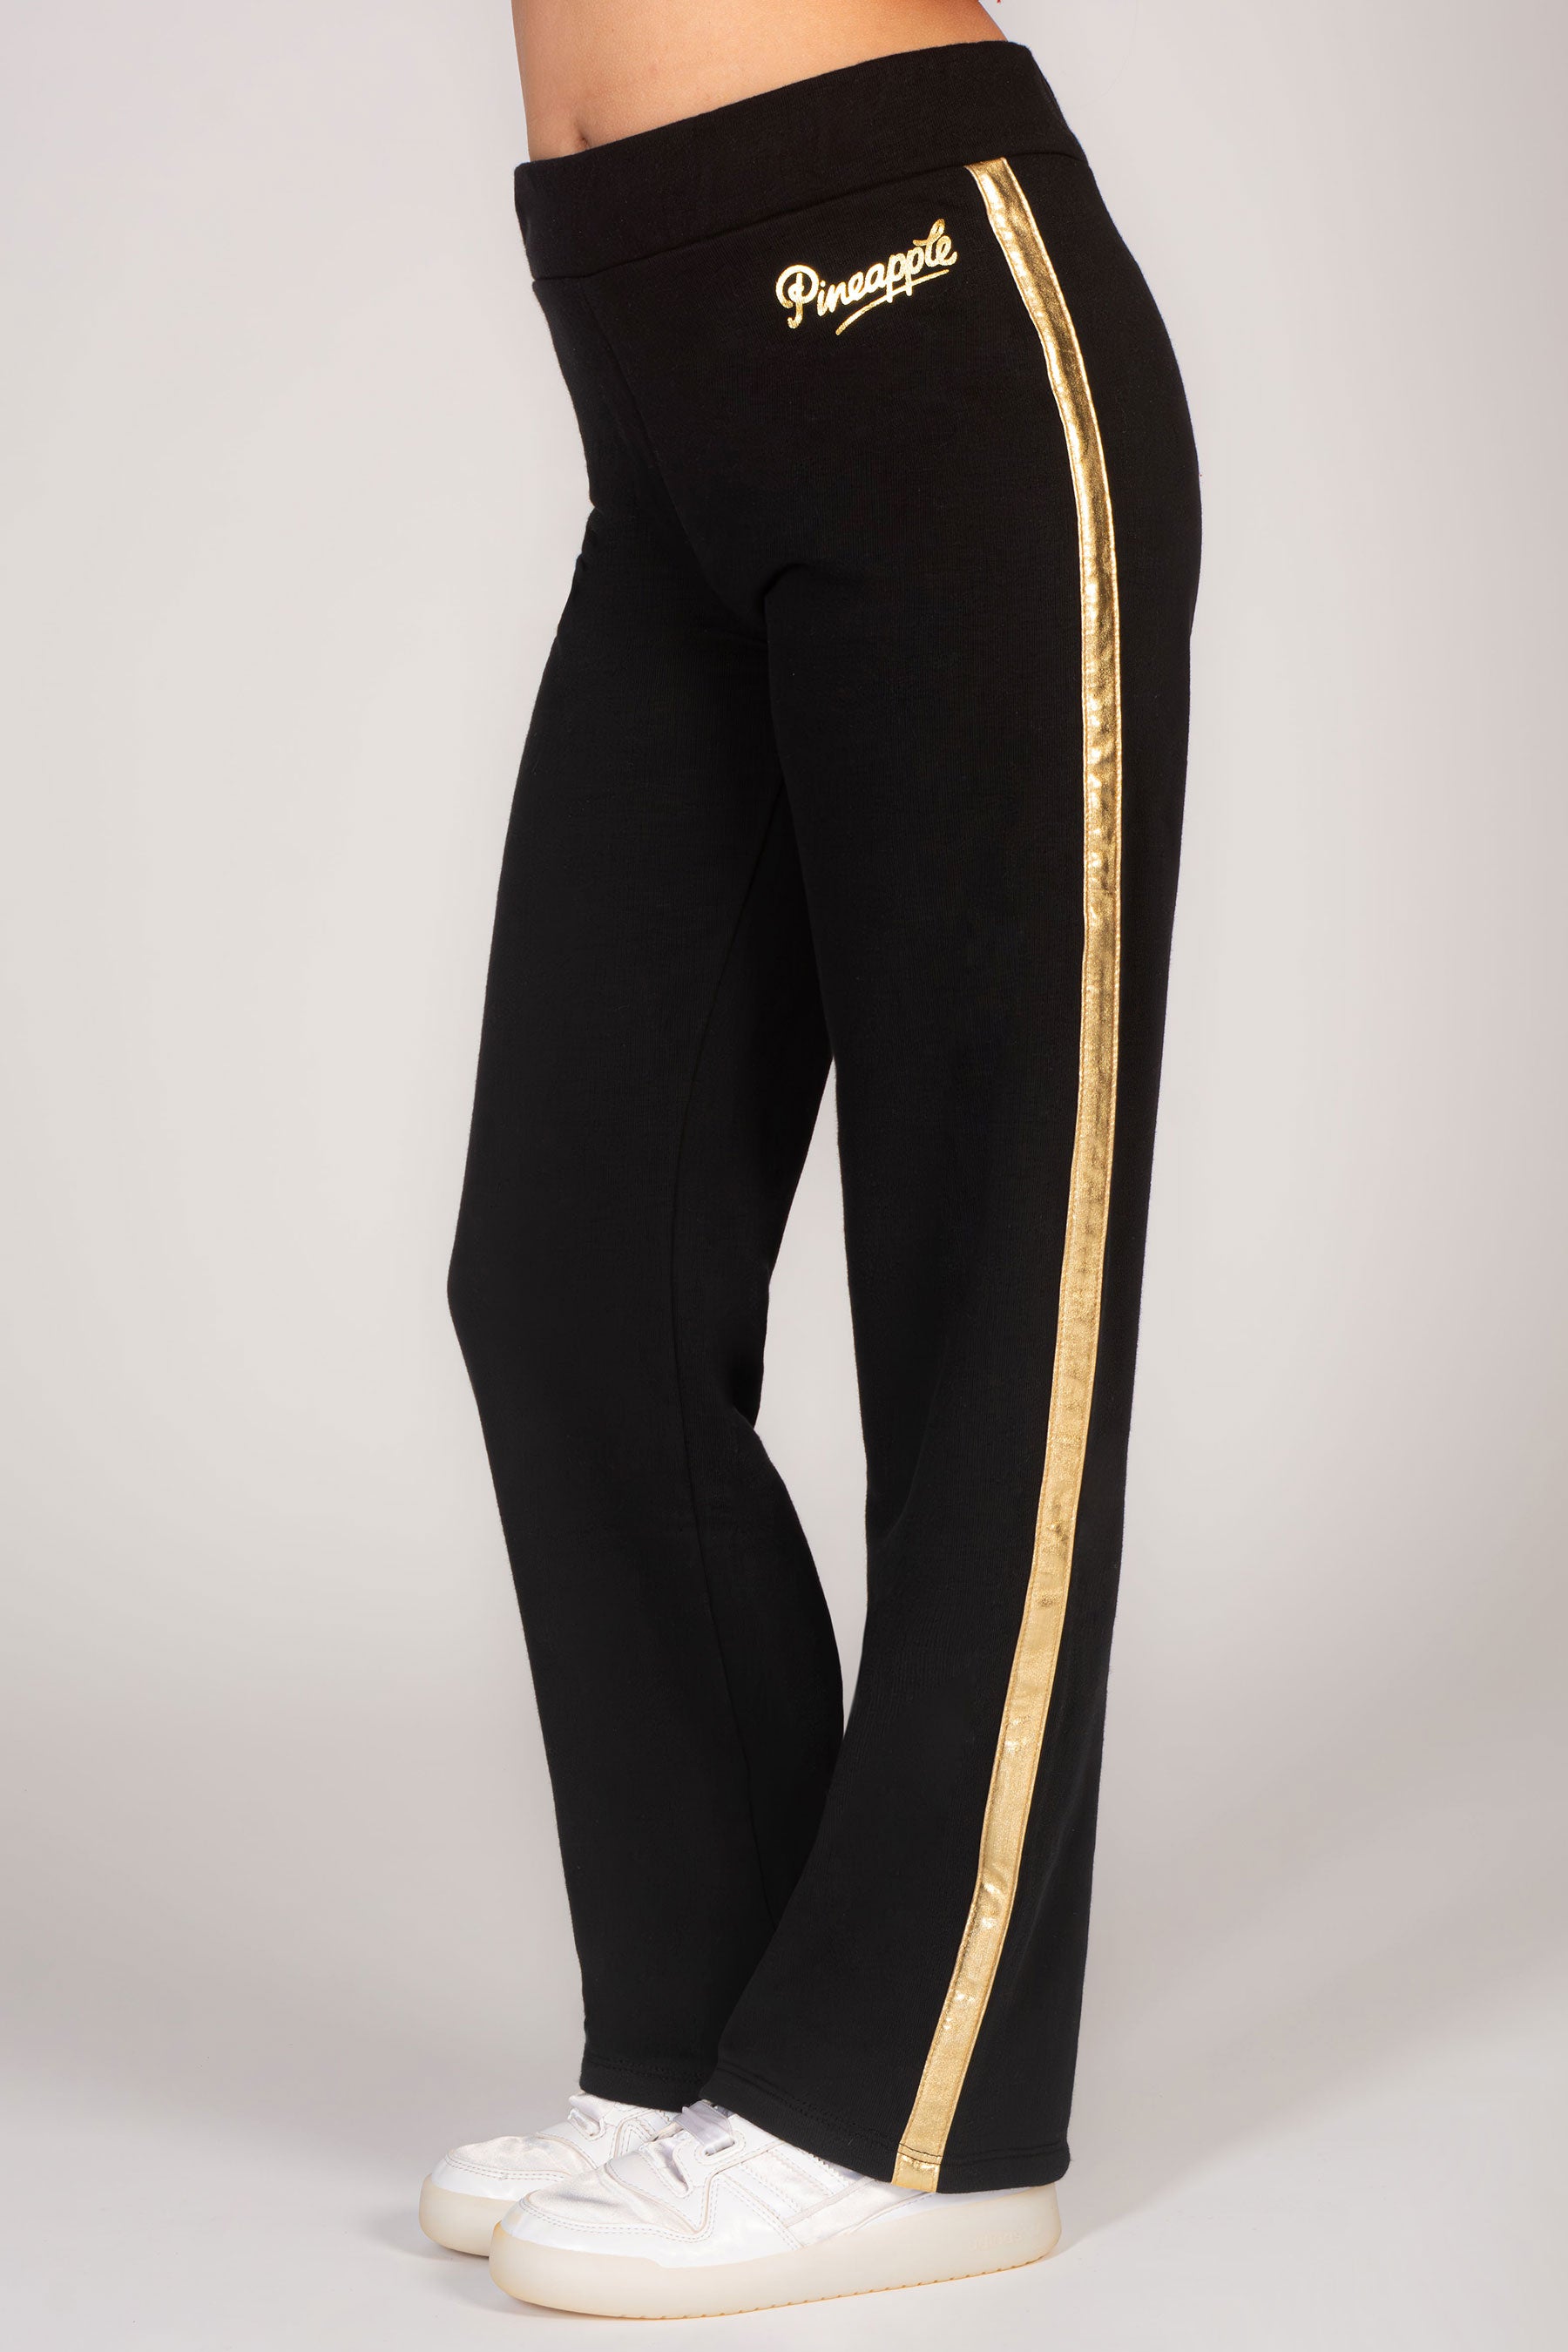 Black Wide Leg Joggers with Gold Stripe Detail | Girls' Lounge Styles